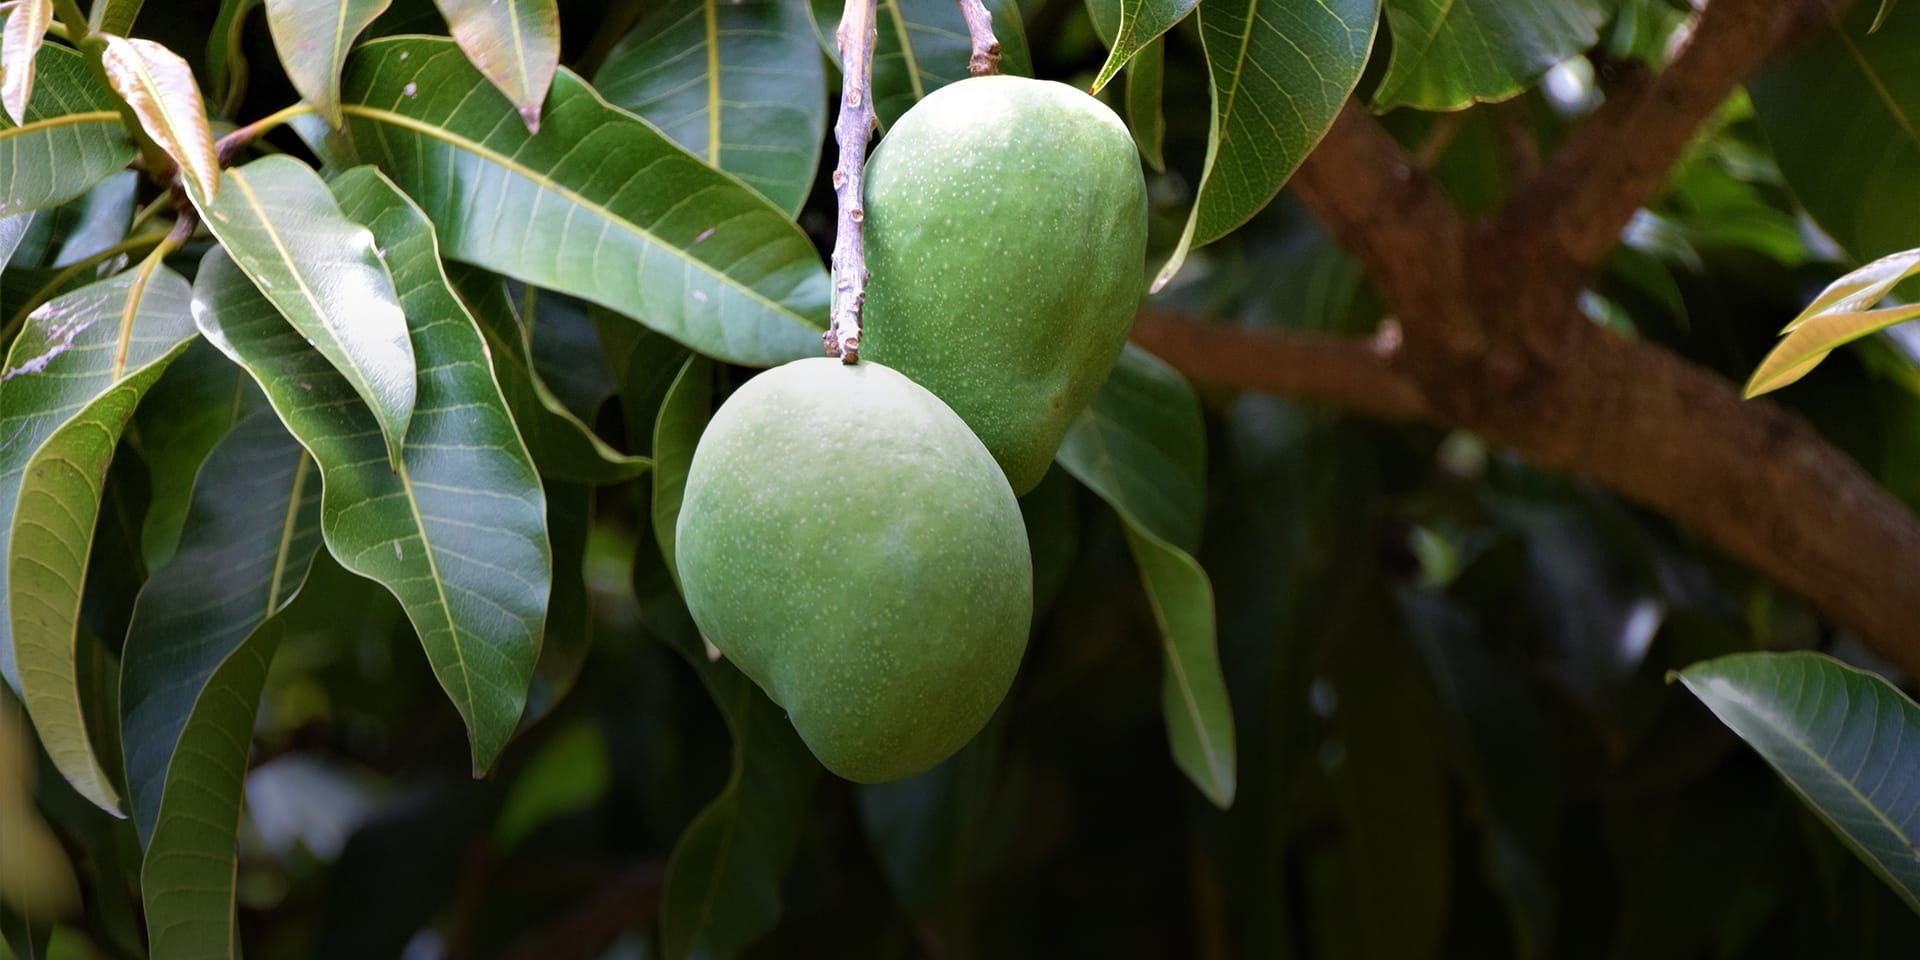 A close-up image of mangoes growing on a tree.